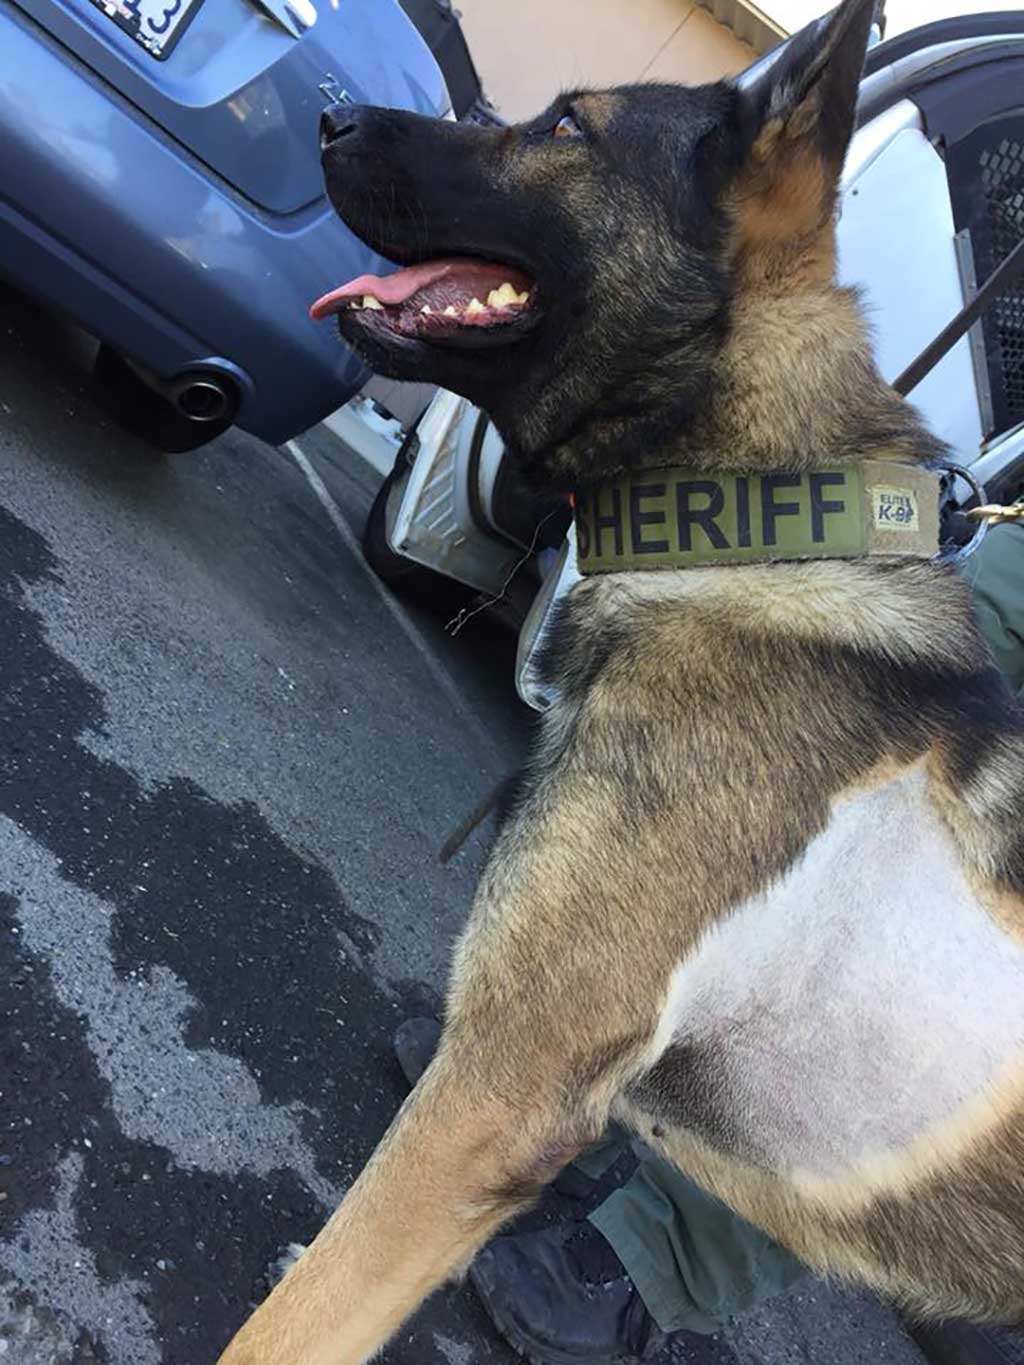 A police dog is another agent (at least in the US)